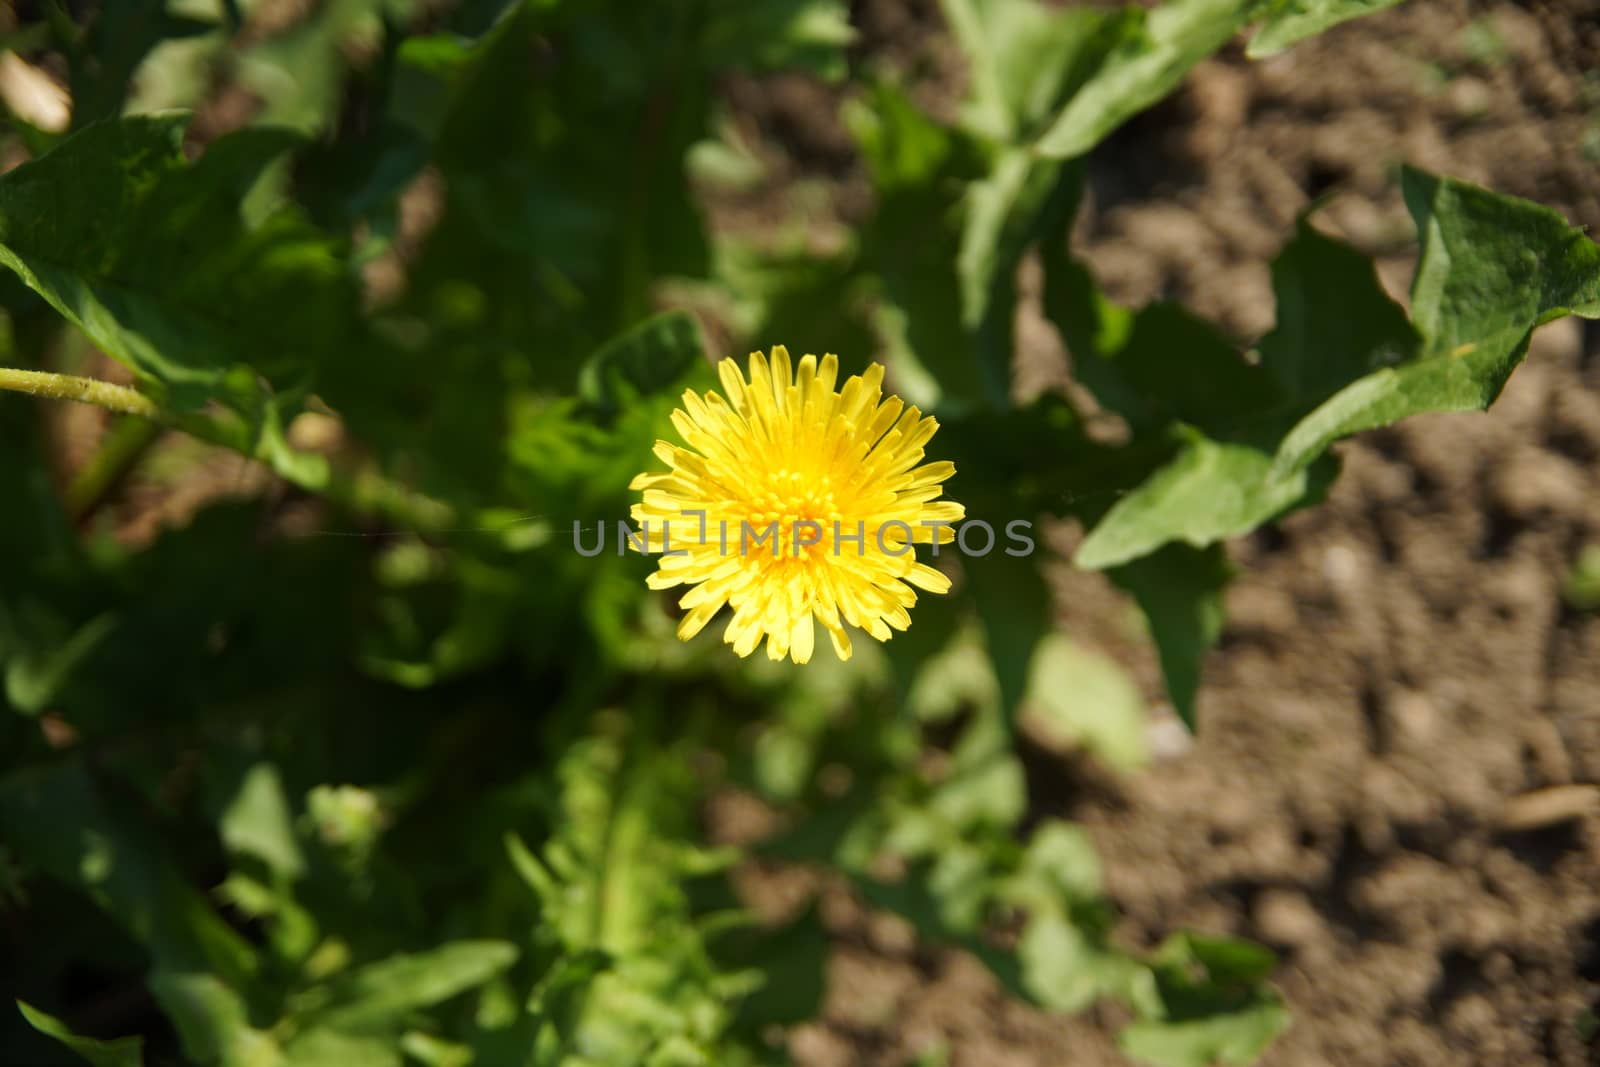 yellow dandelion on a background of green grass in summer